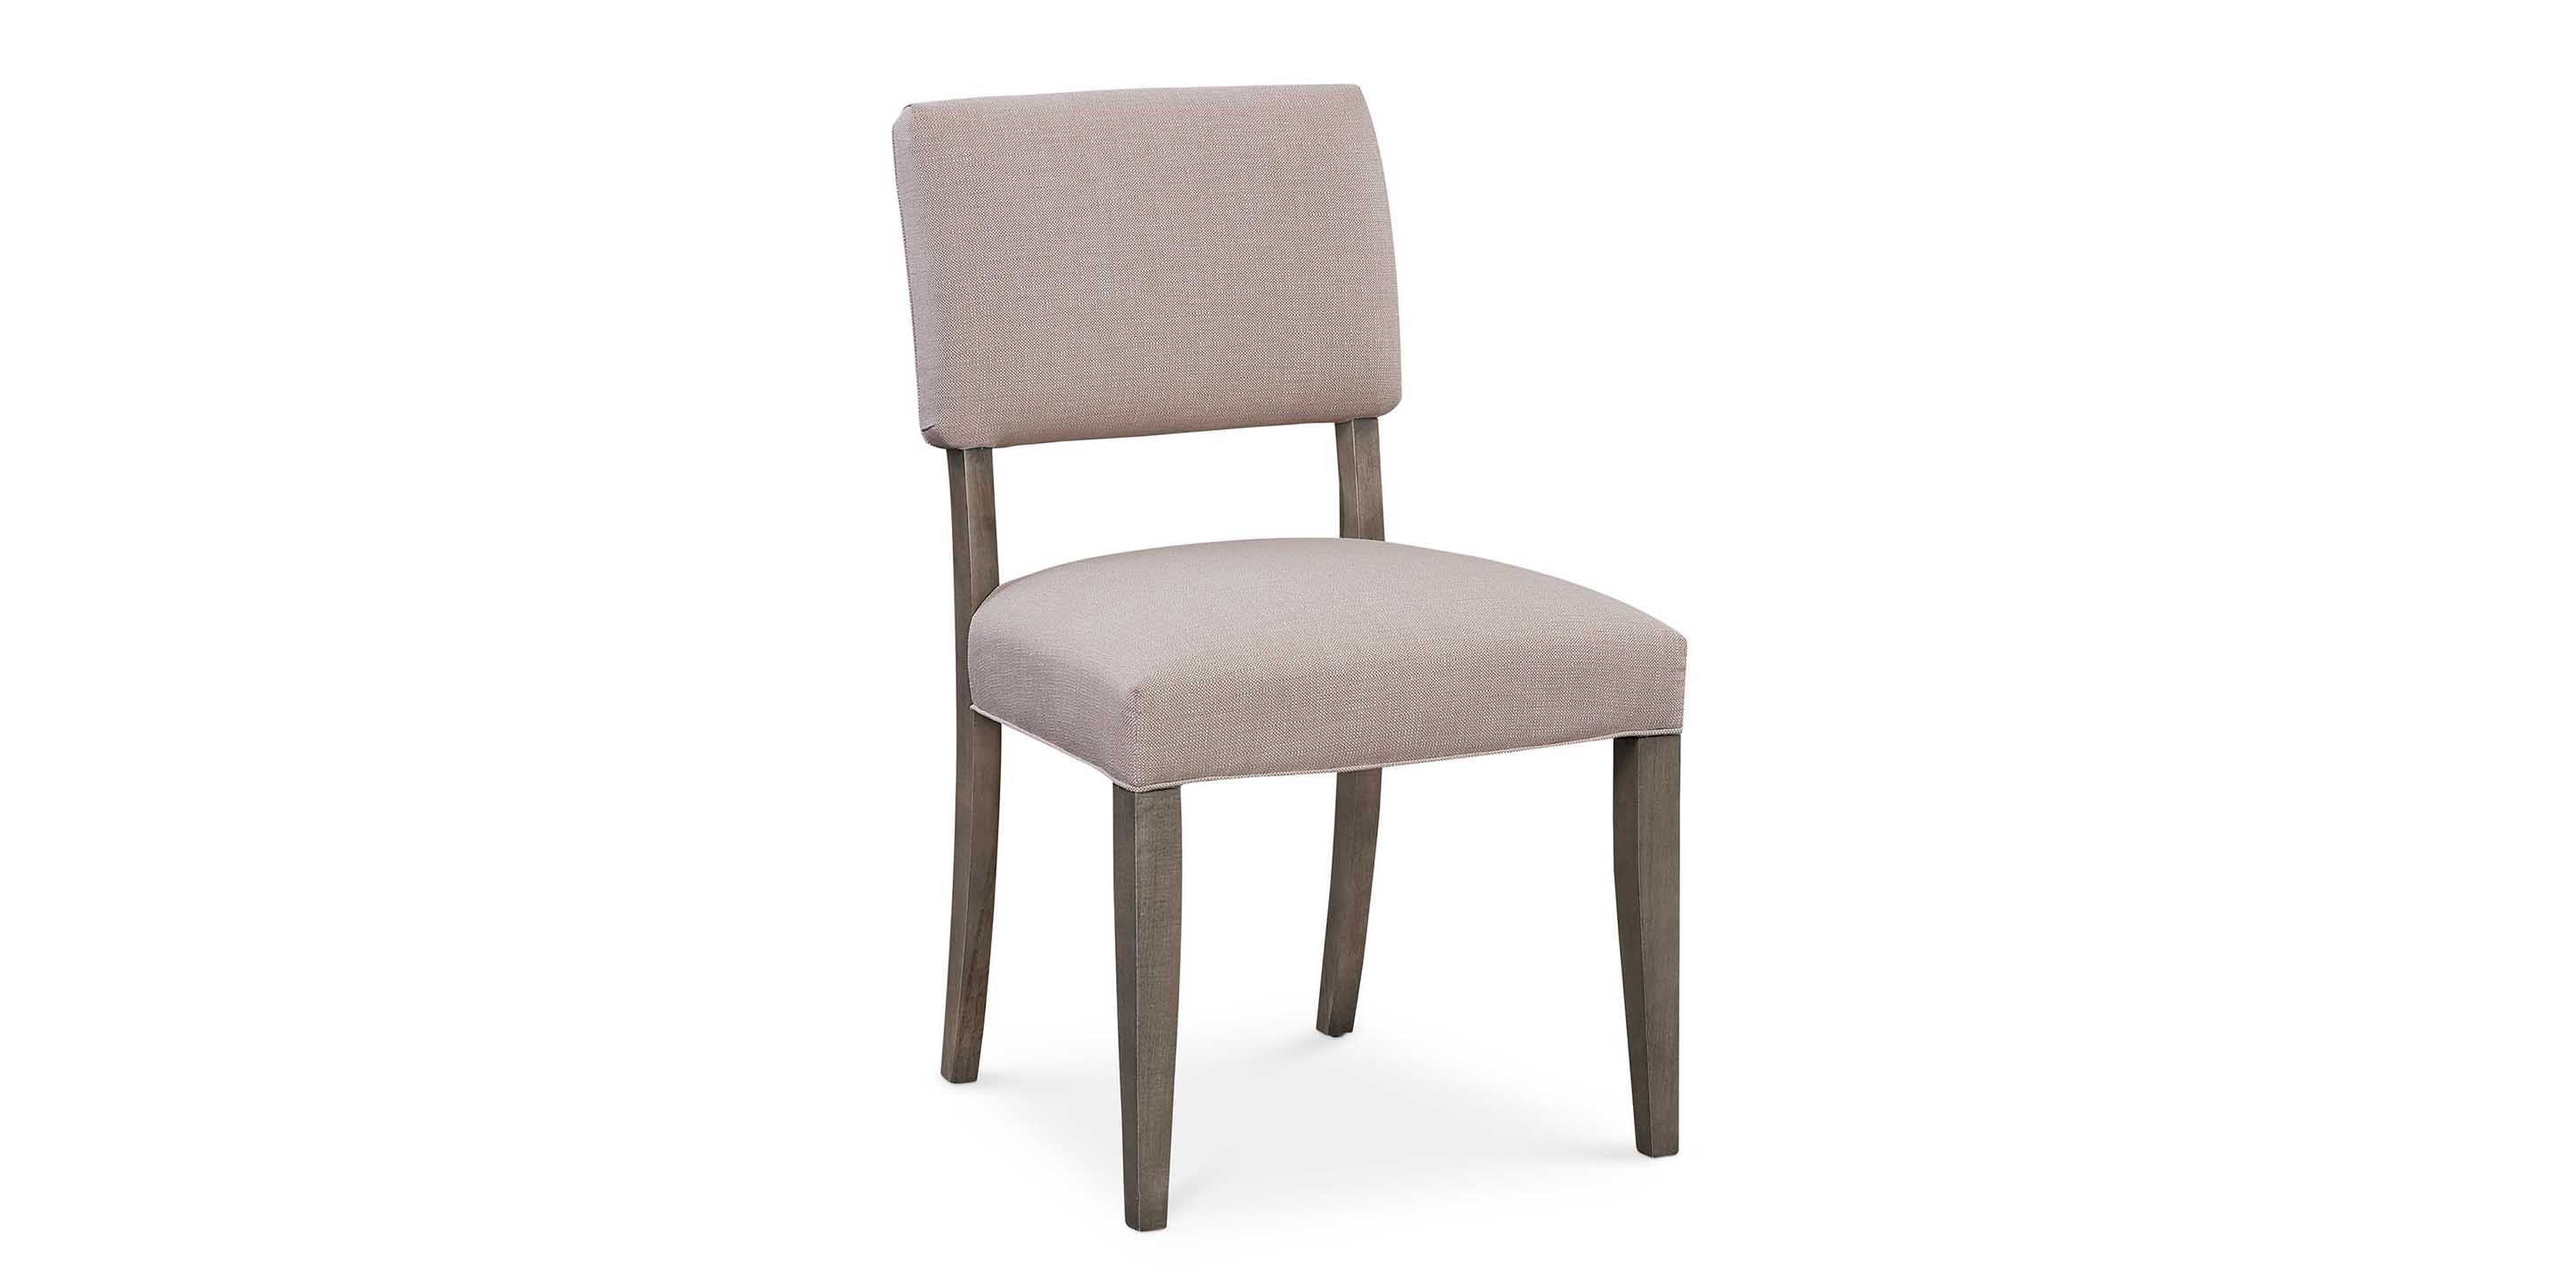 Bailey Upholstered Dining Chair